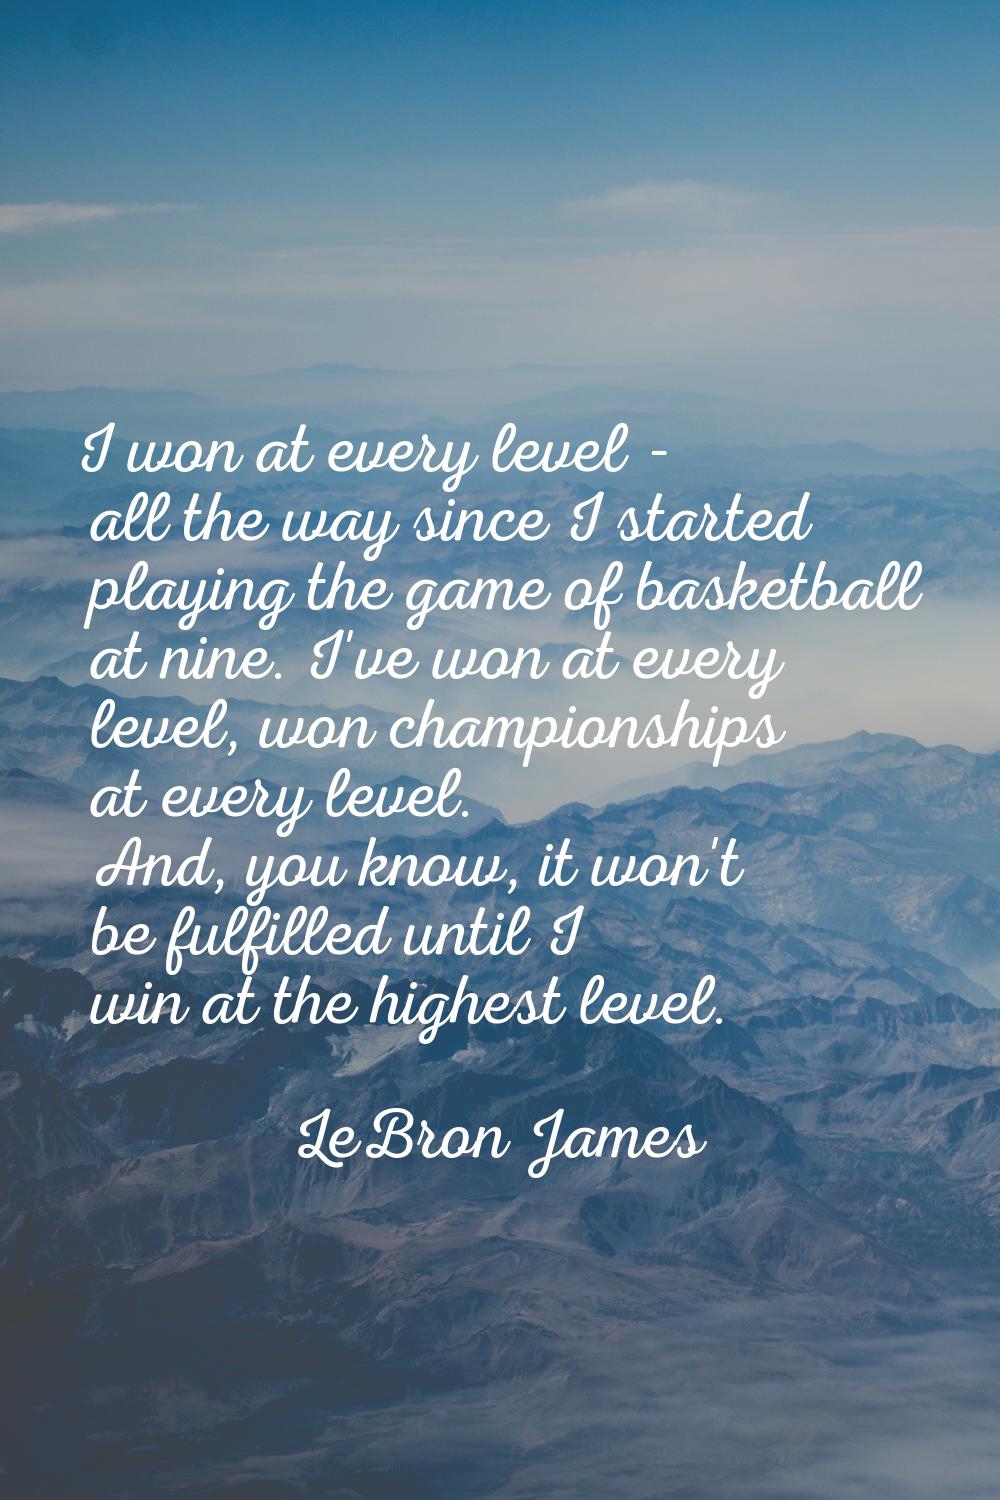 I won at every level - all the way since I started playing the game of basketball at nine. I've won